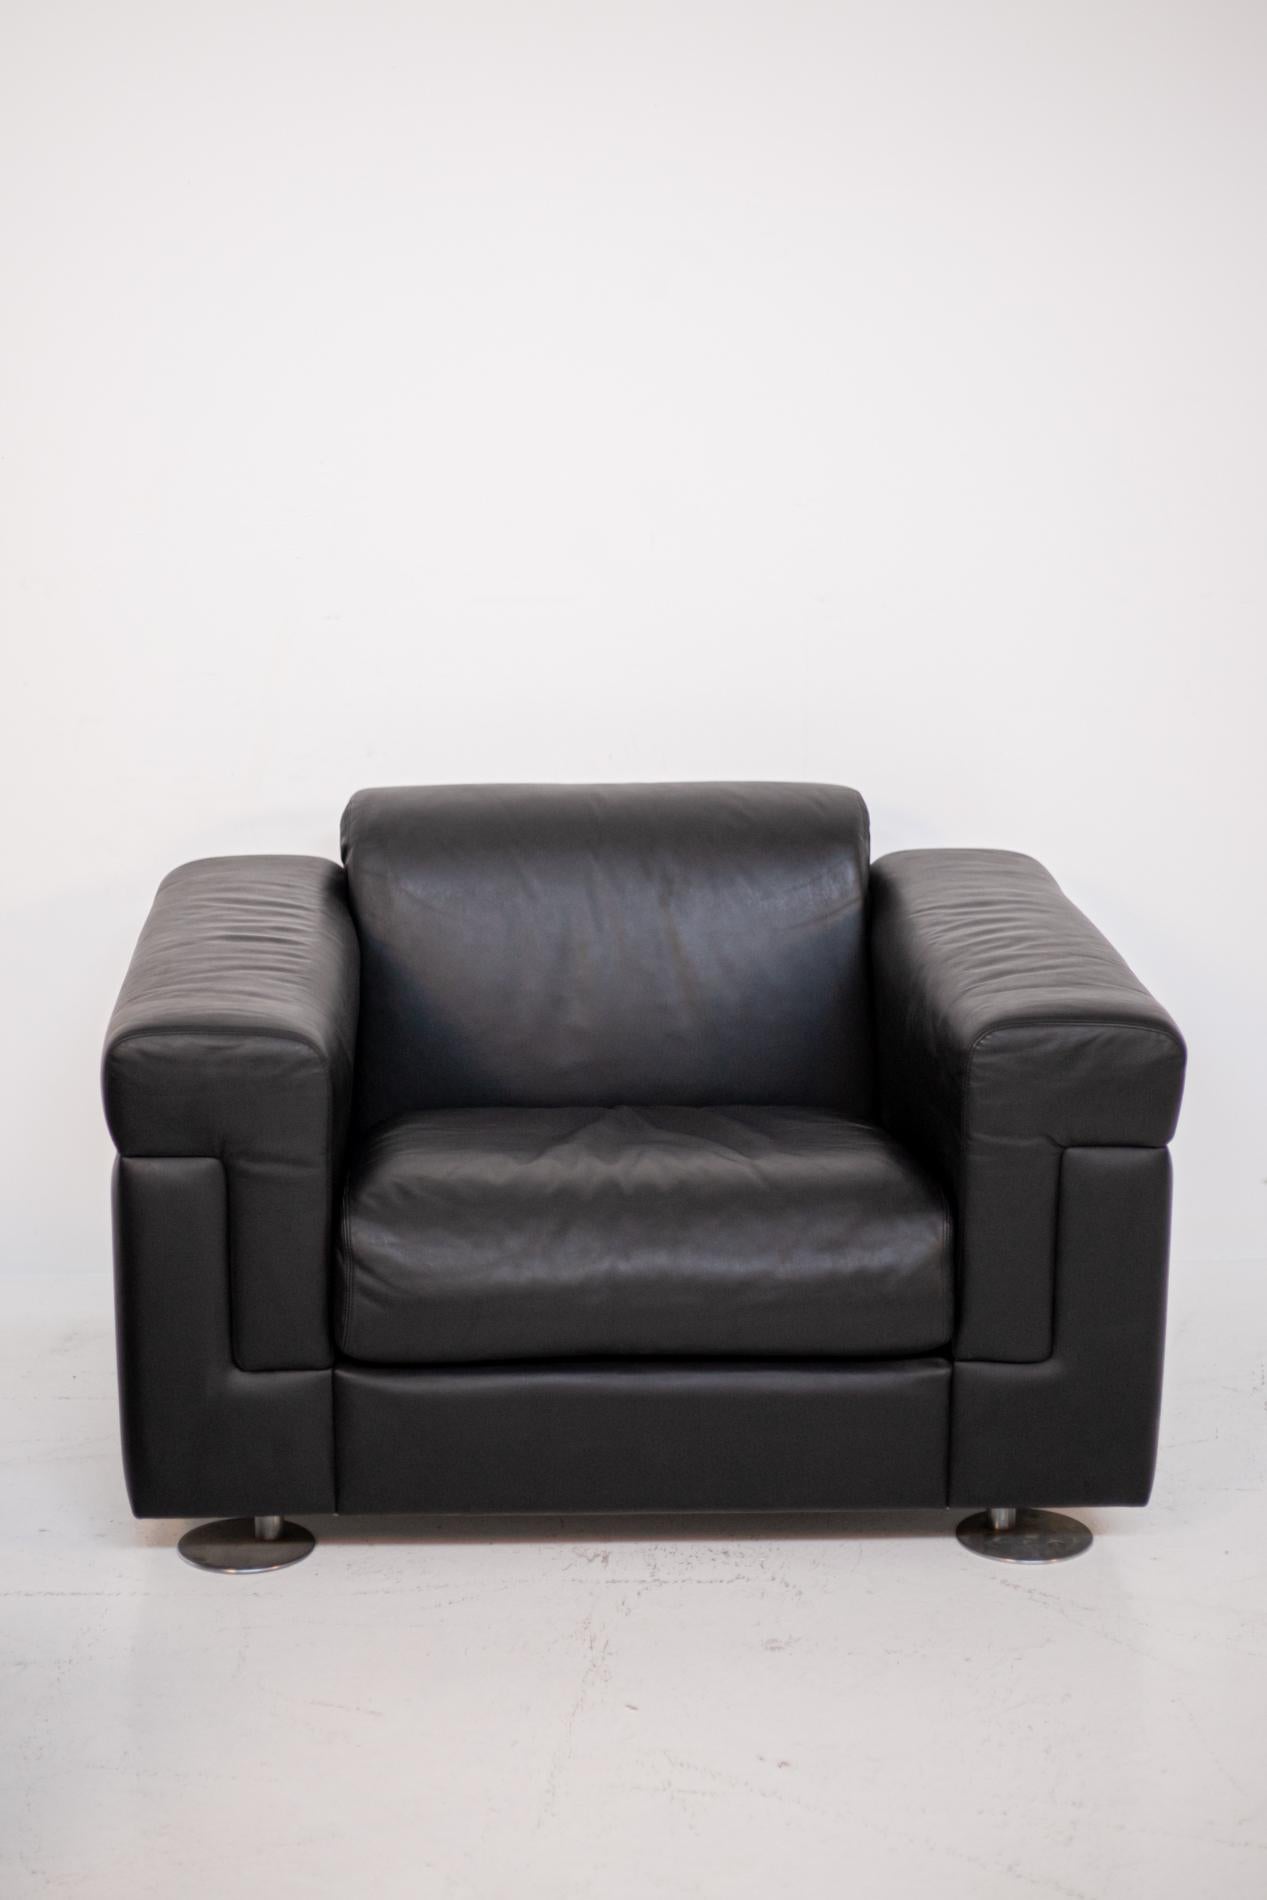 Osvaldo Borsani for Tecno Pairs of Armchairs in Black Leather, Mod D120 In Good Condition For Sale In Milano, IT